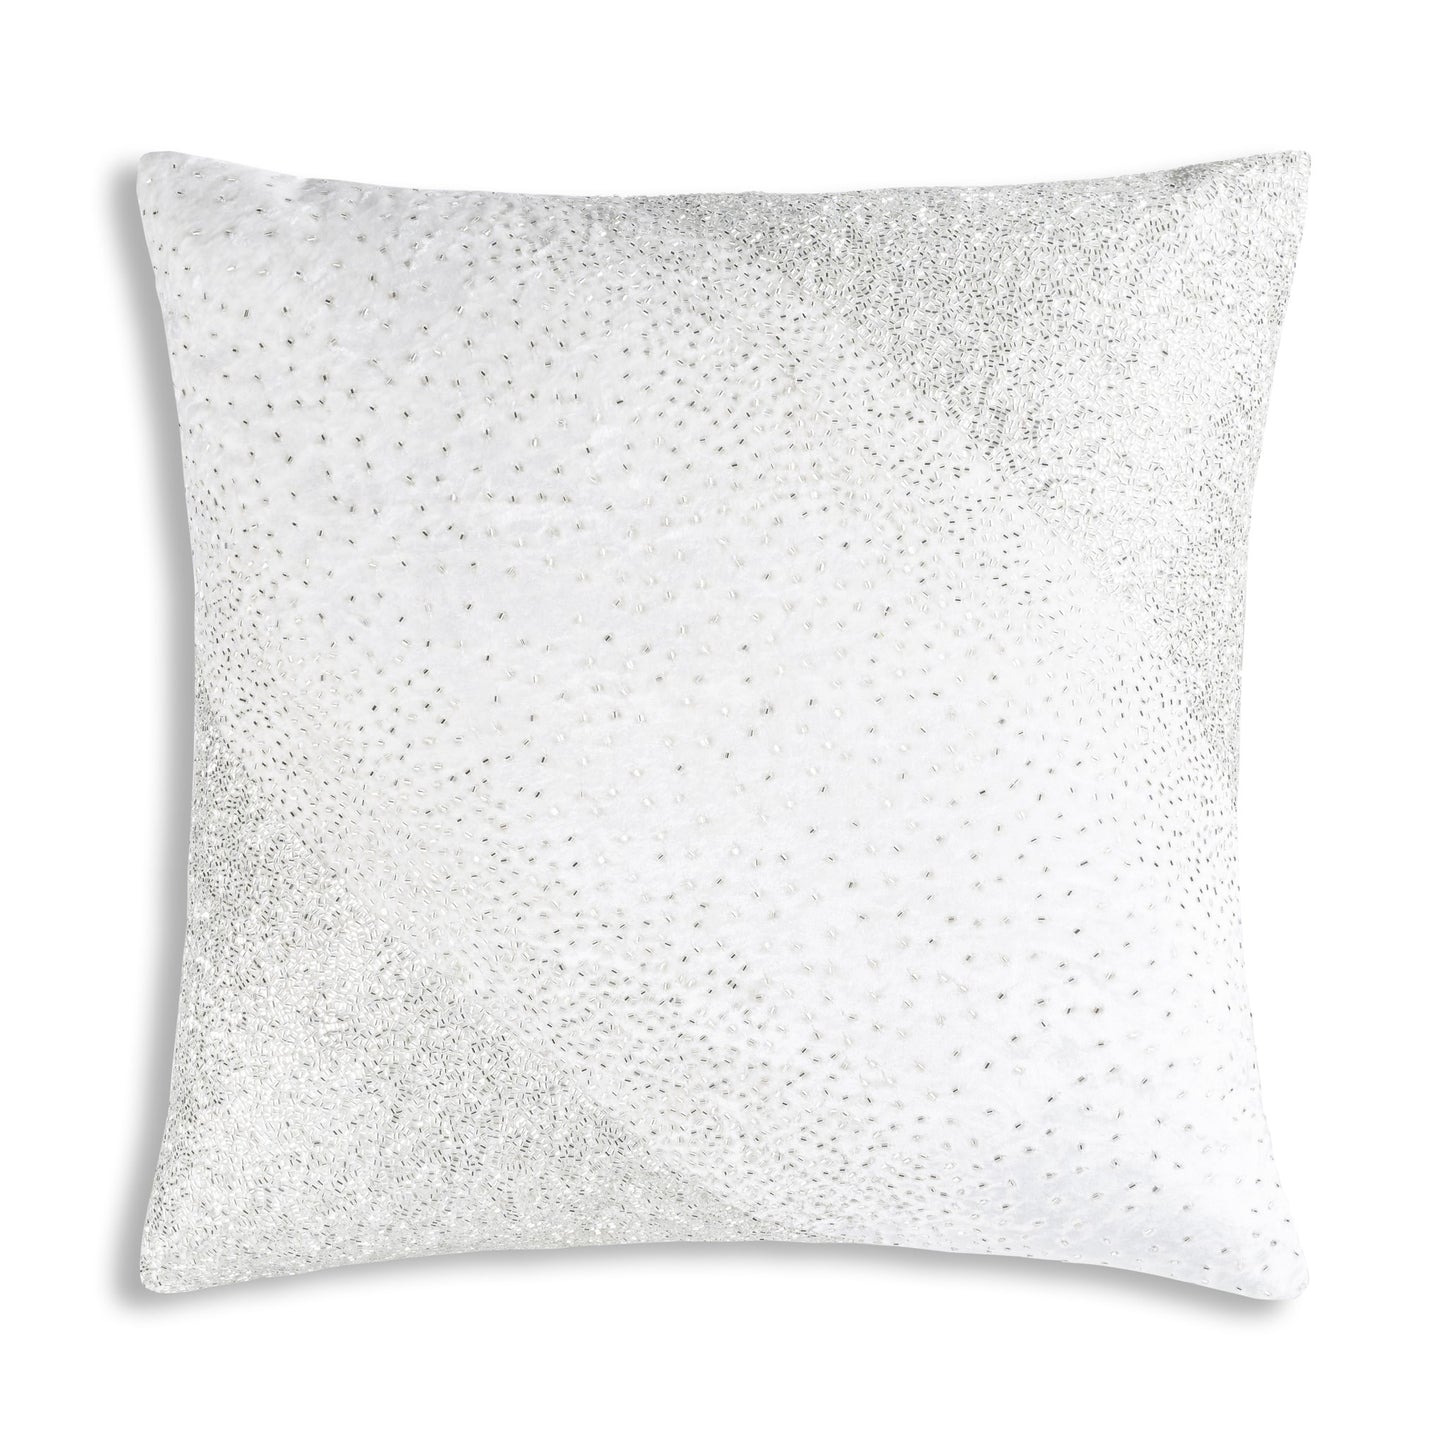 Ivory Velvet Pillow with Scattered Crystals